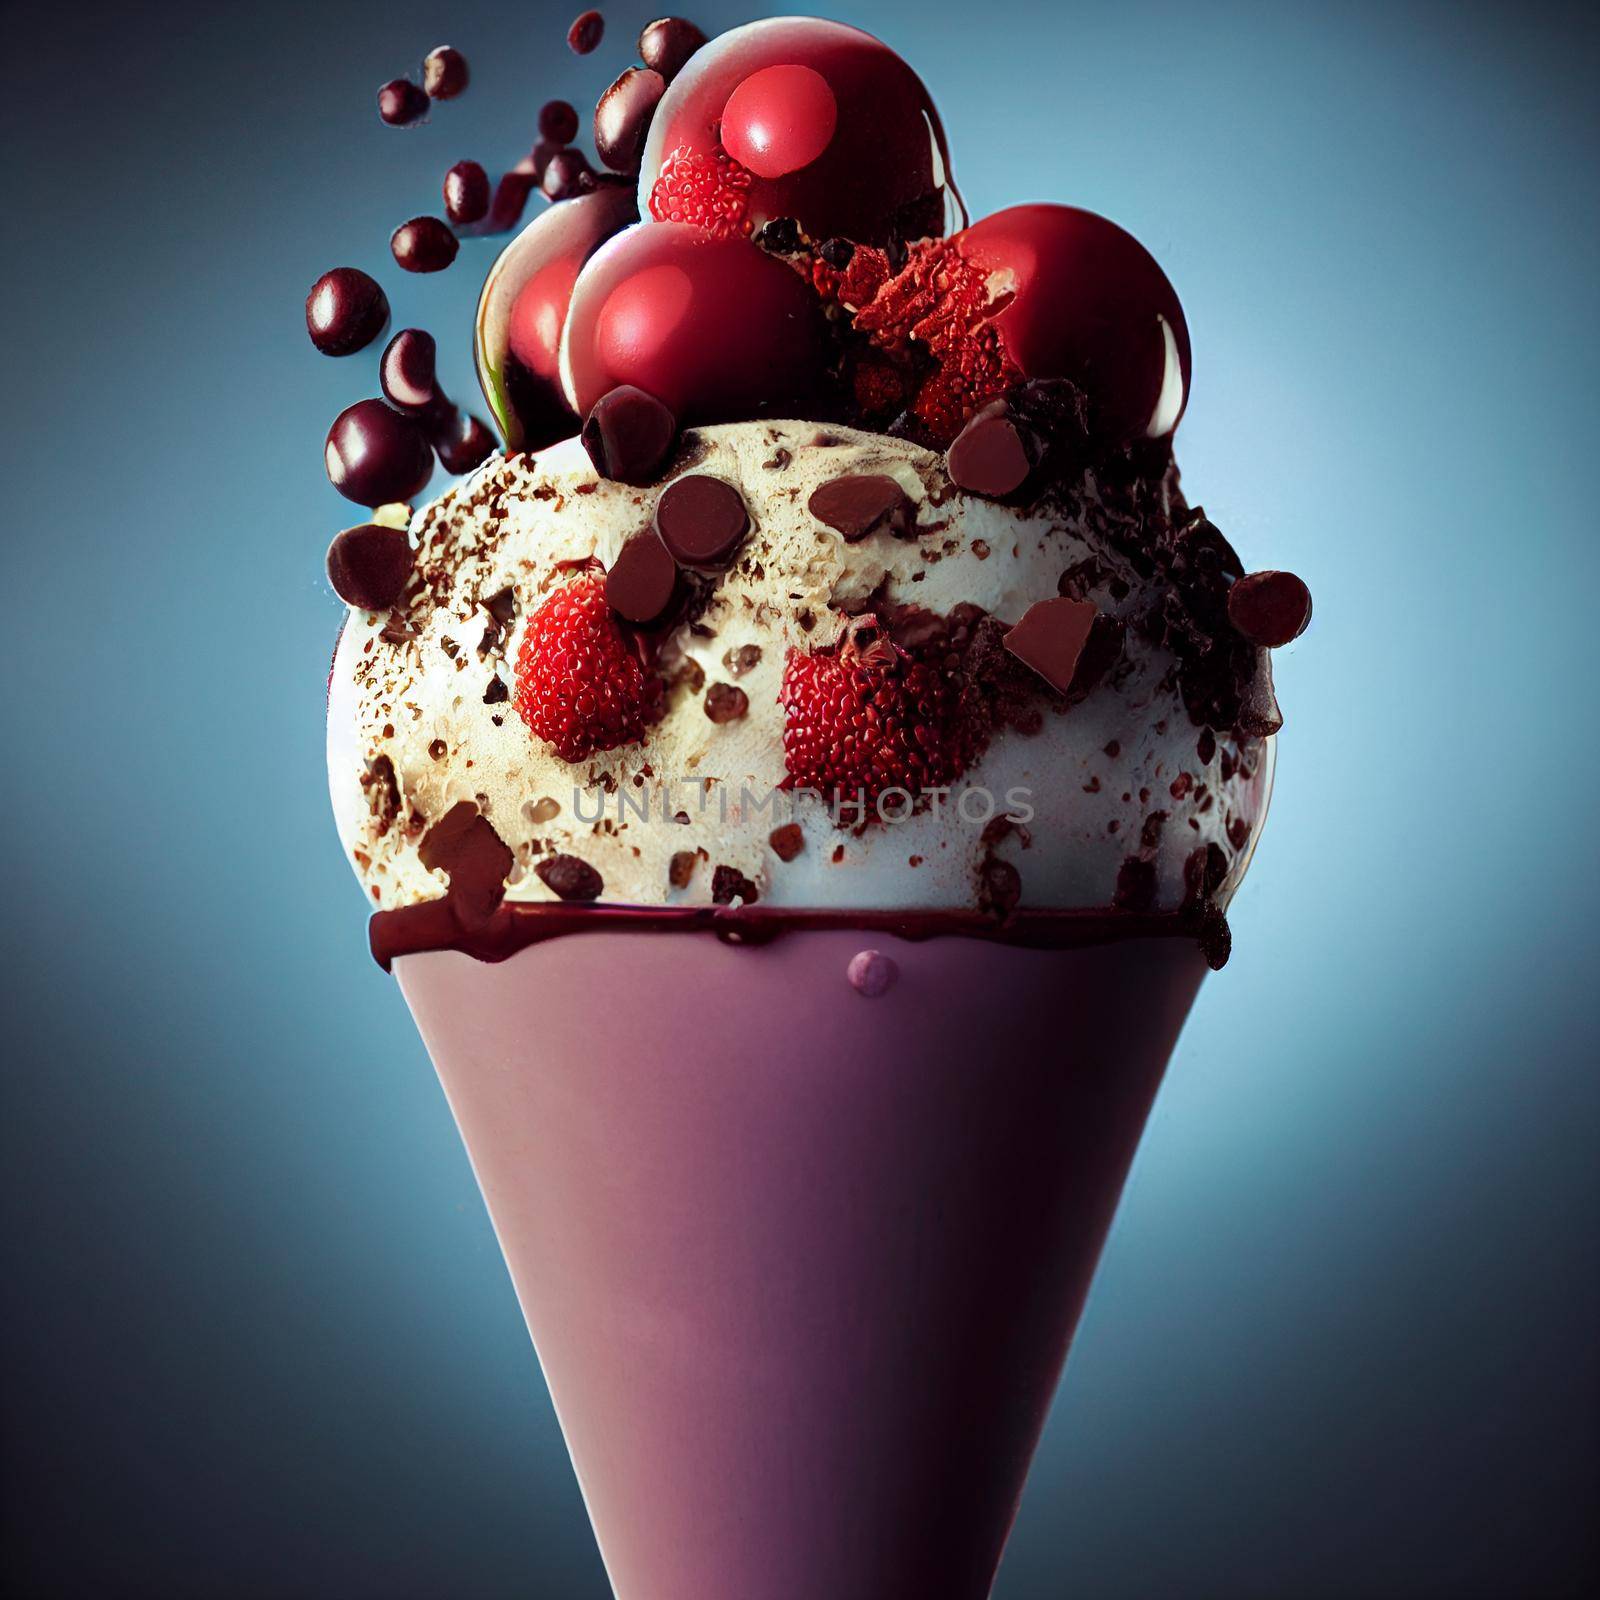 Realistic 3d illustration ice cream in a plastic cone, with berries and pieces of chocolate.